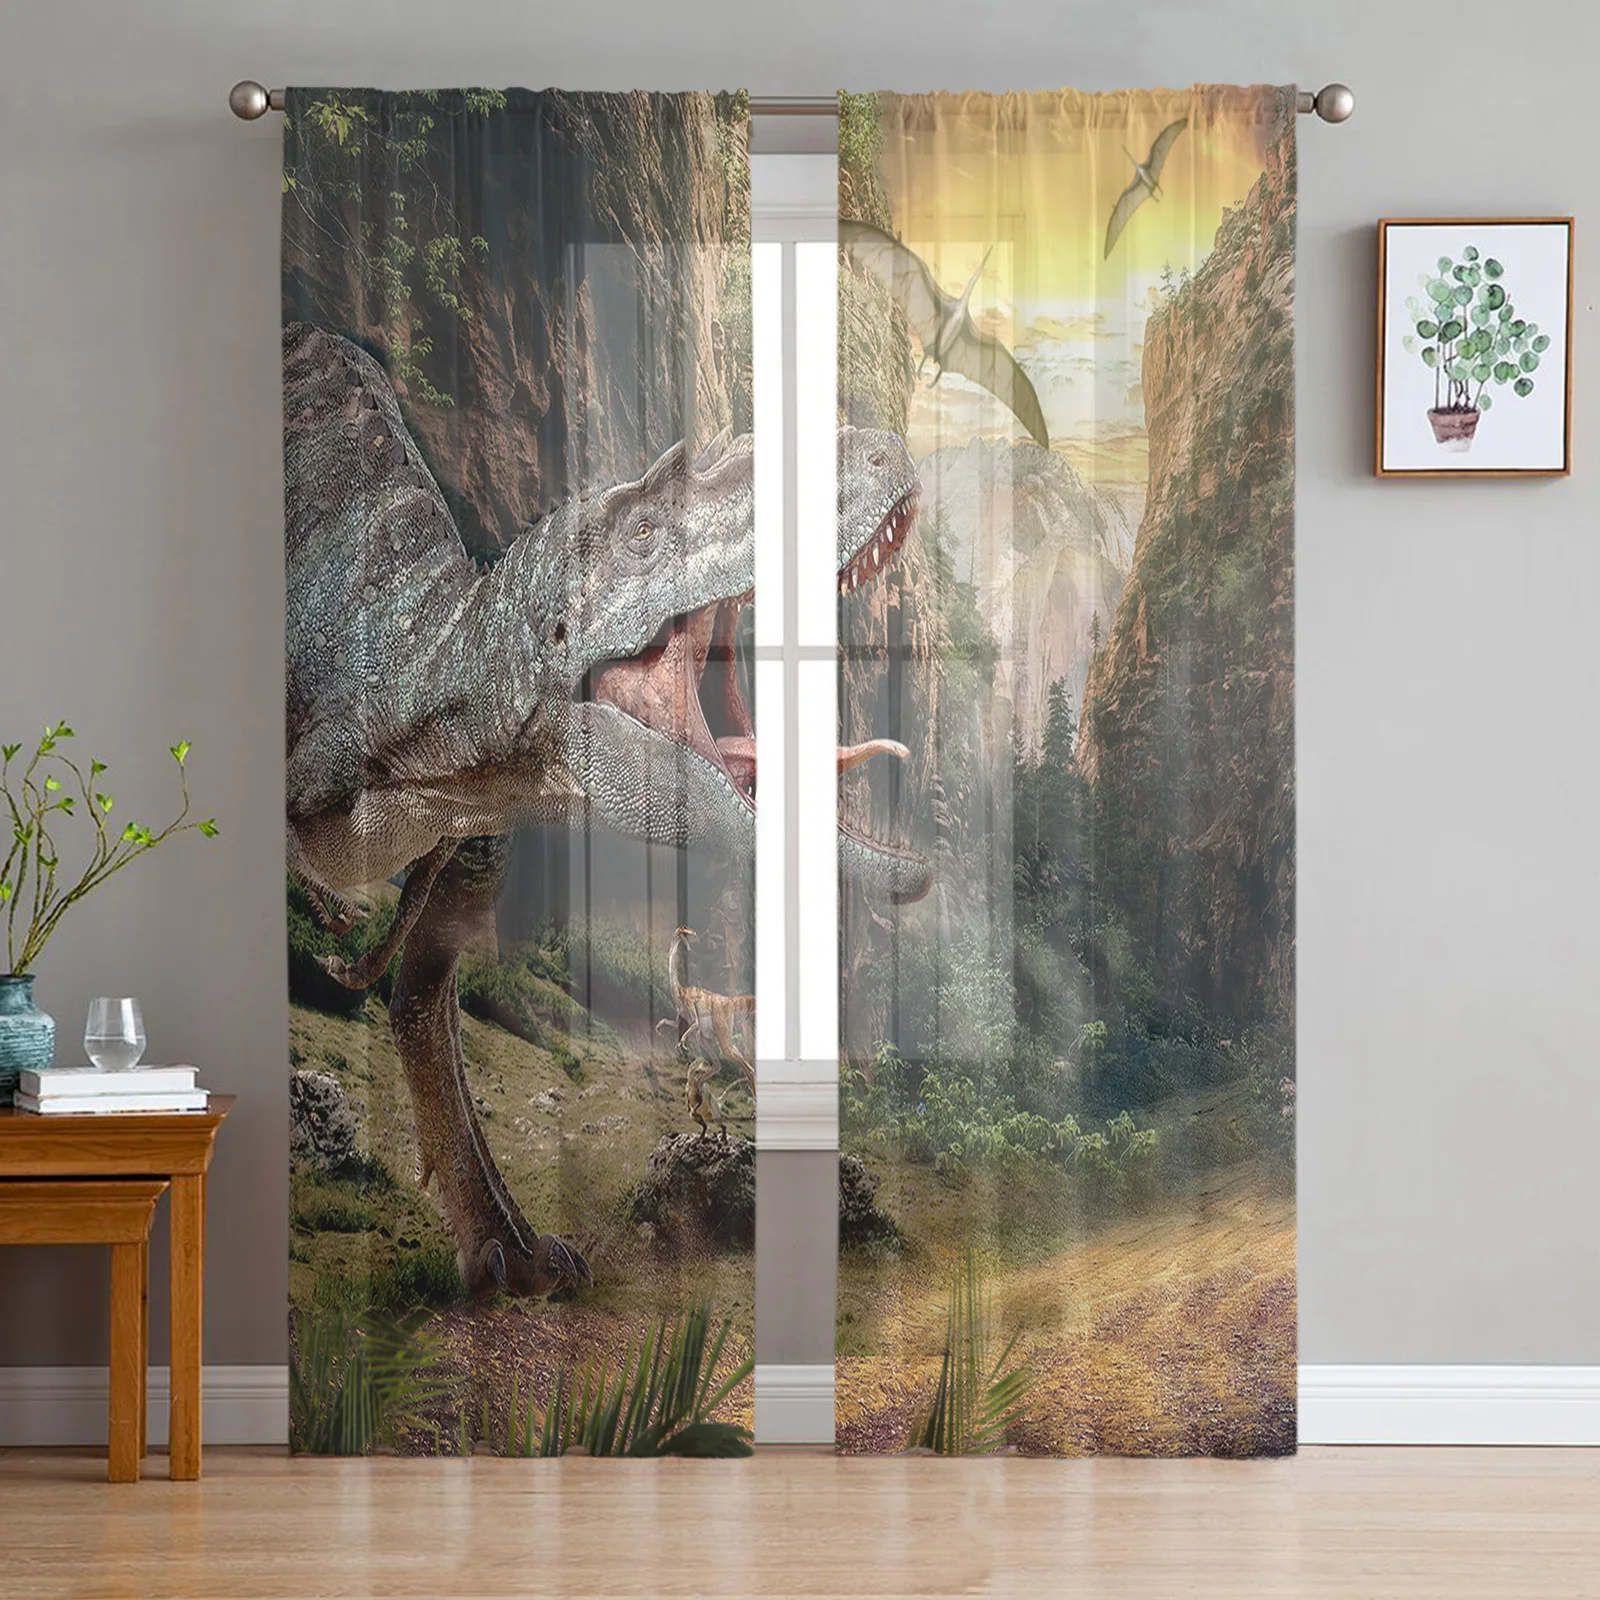 

Jurassic Dinosaur 3D Primeval Forest Tulle Sheer Curtains for Living Room Bedroom Kitchen Decor Voile Organza Window Curtains